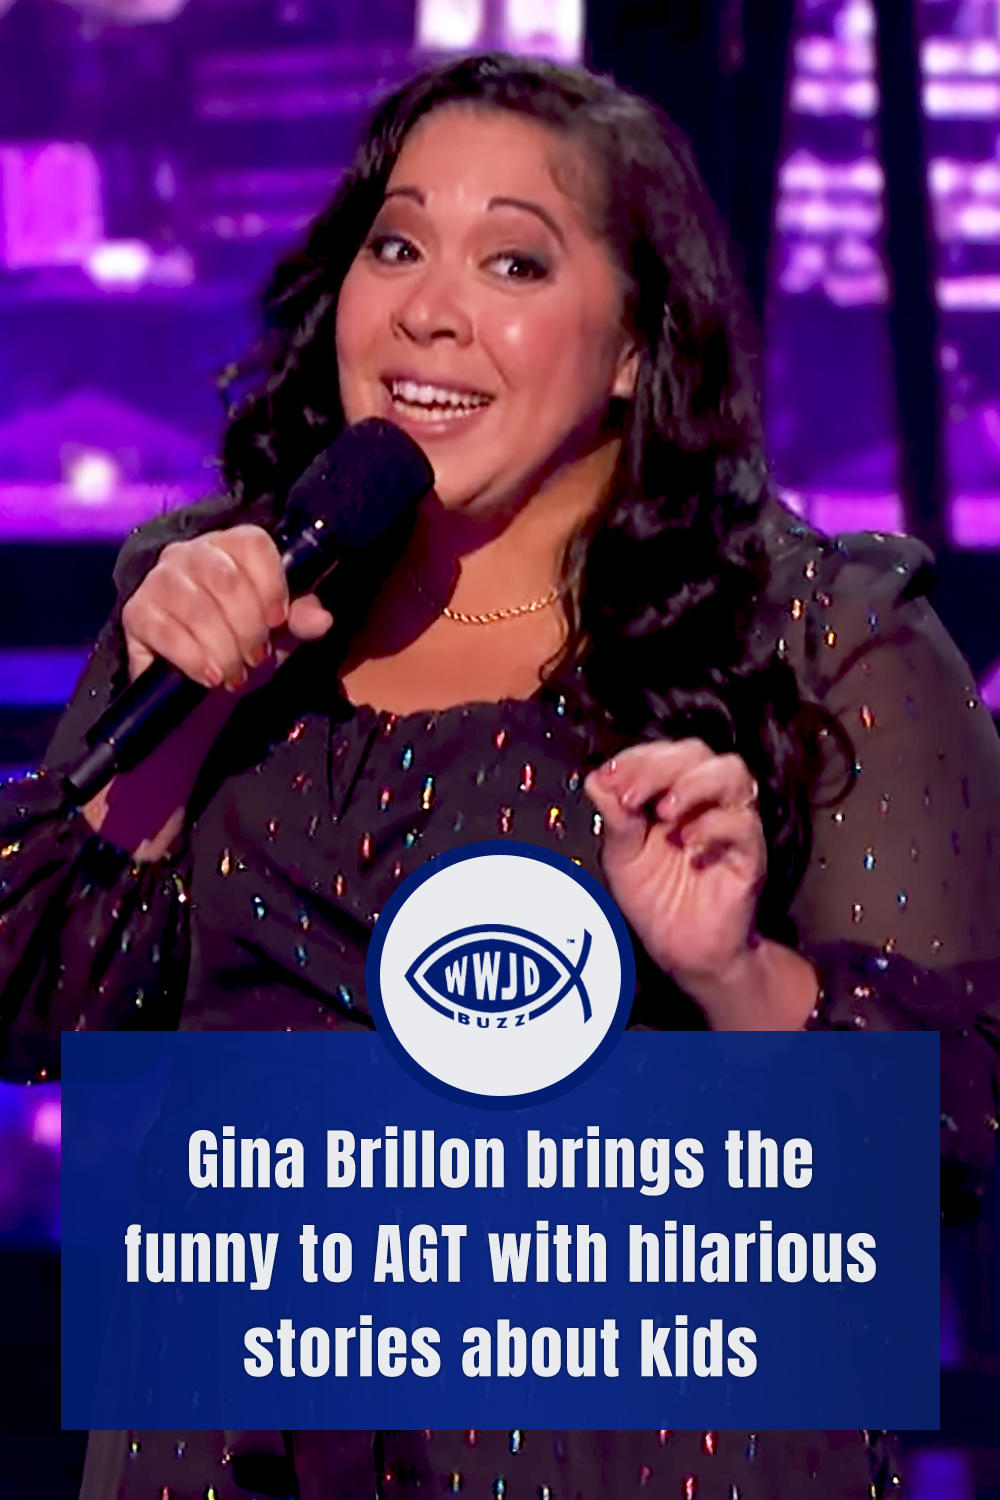 Gina Brillon brings the funny to AGT with hilarious stories about kids